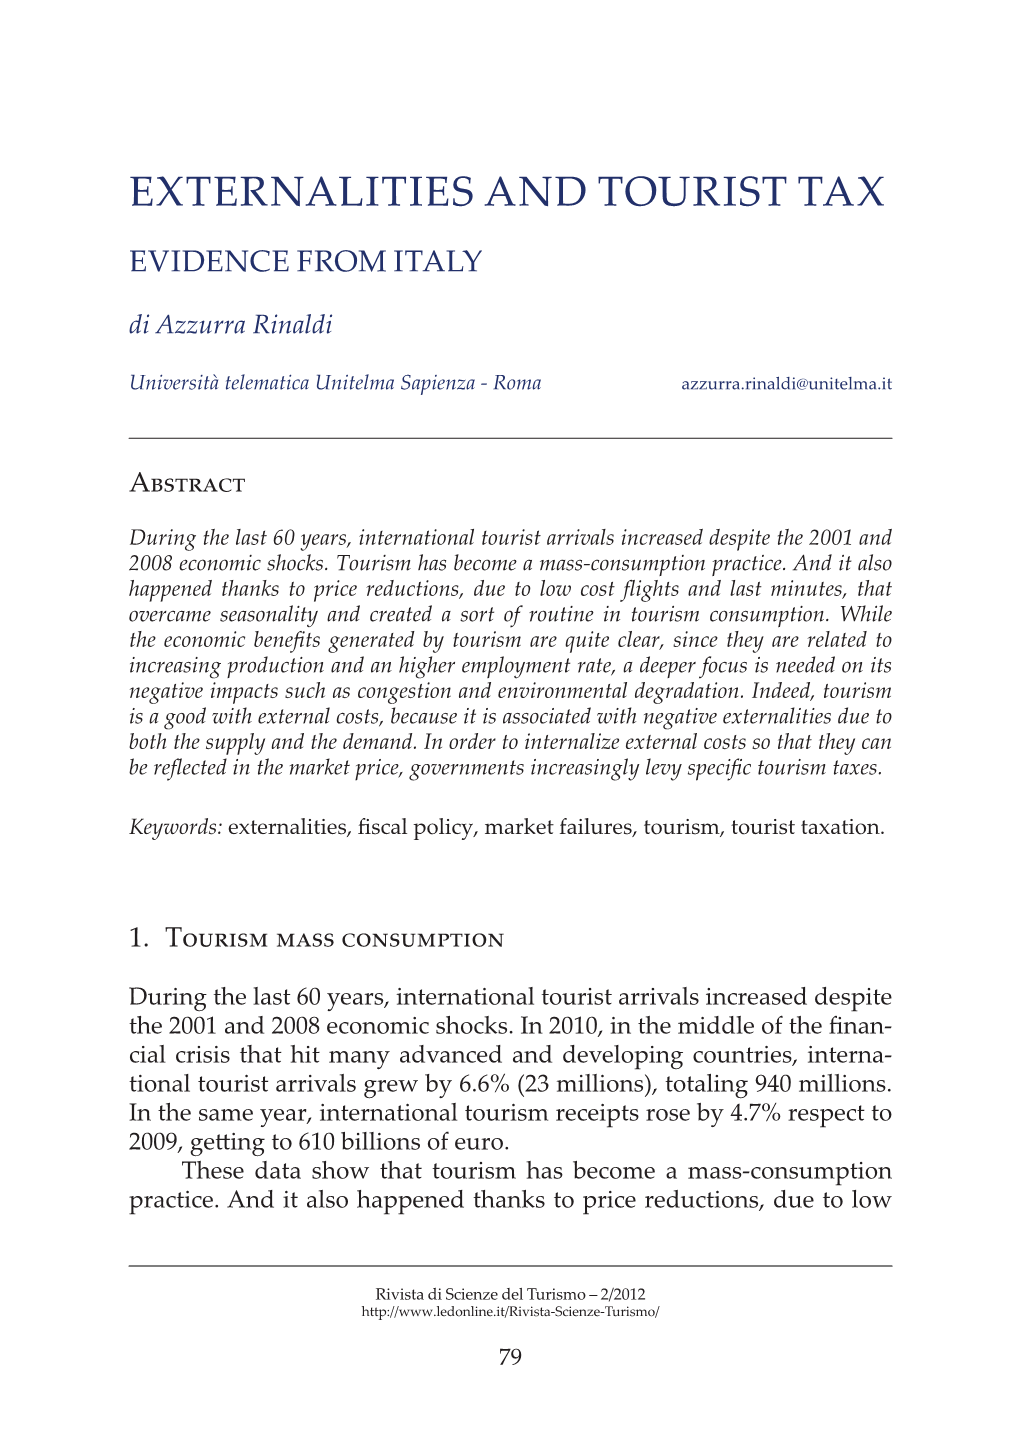 Externalities and Tourist Tax. Evidence from Italy